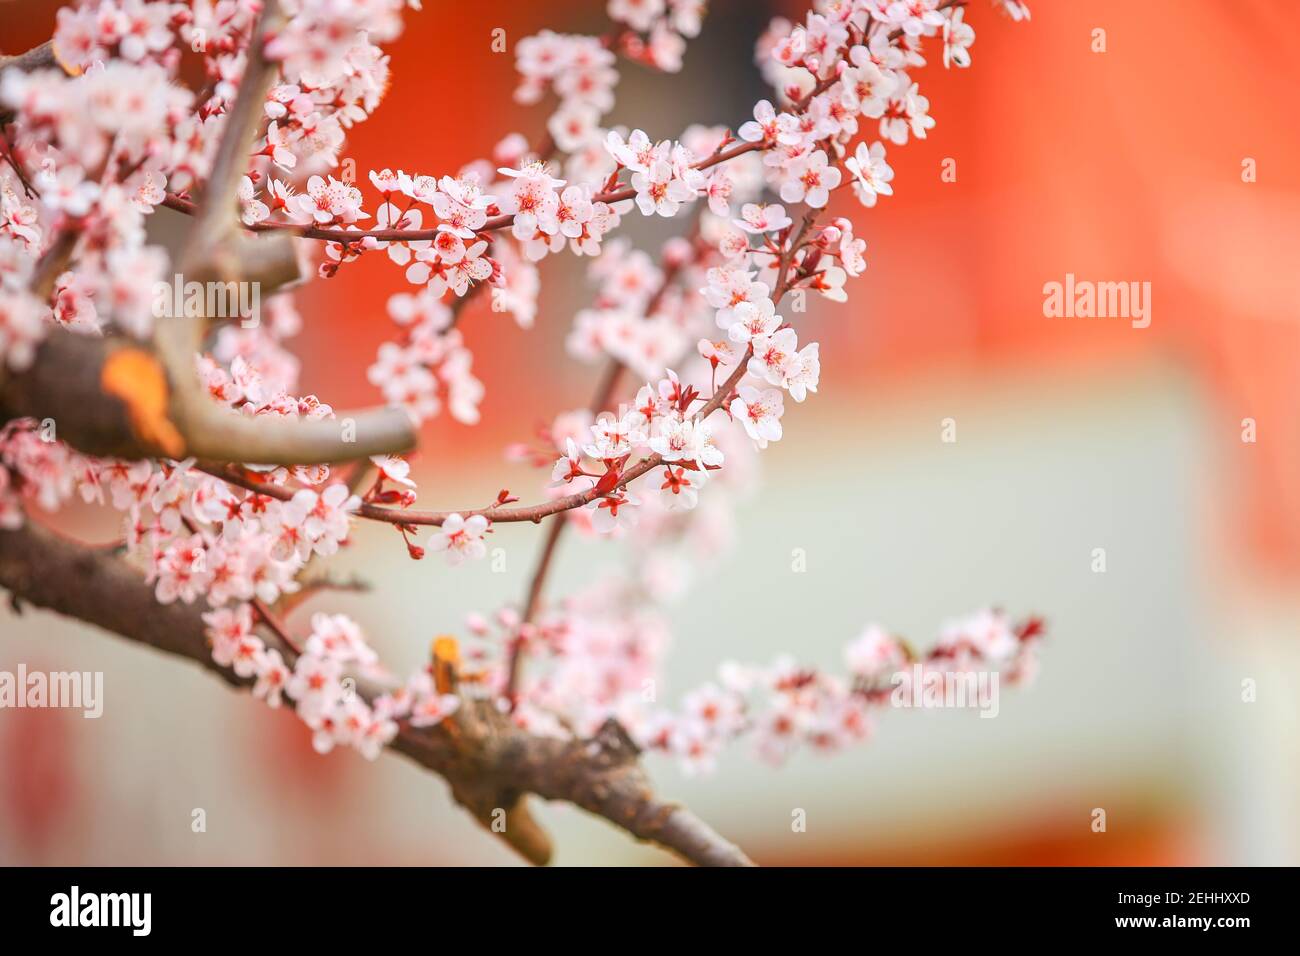 In spring, the plum blossom Stock Photo